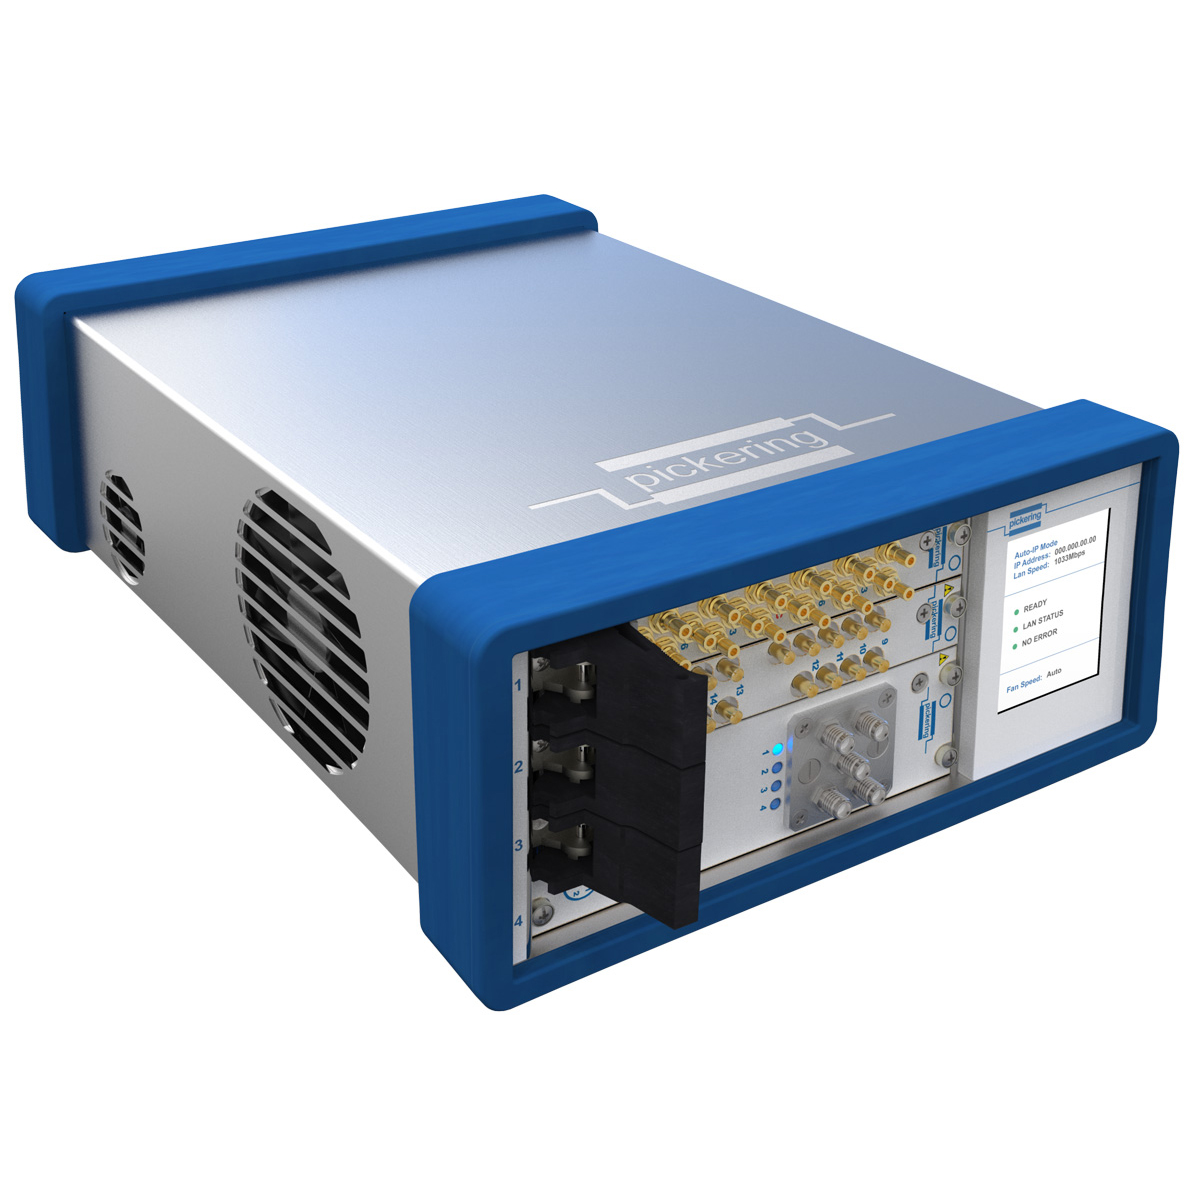 4-slot USB/LXI Modular Chassis from Pickering Interfaces